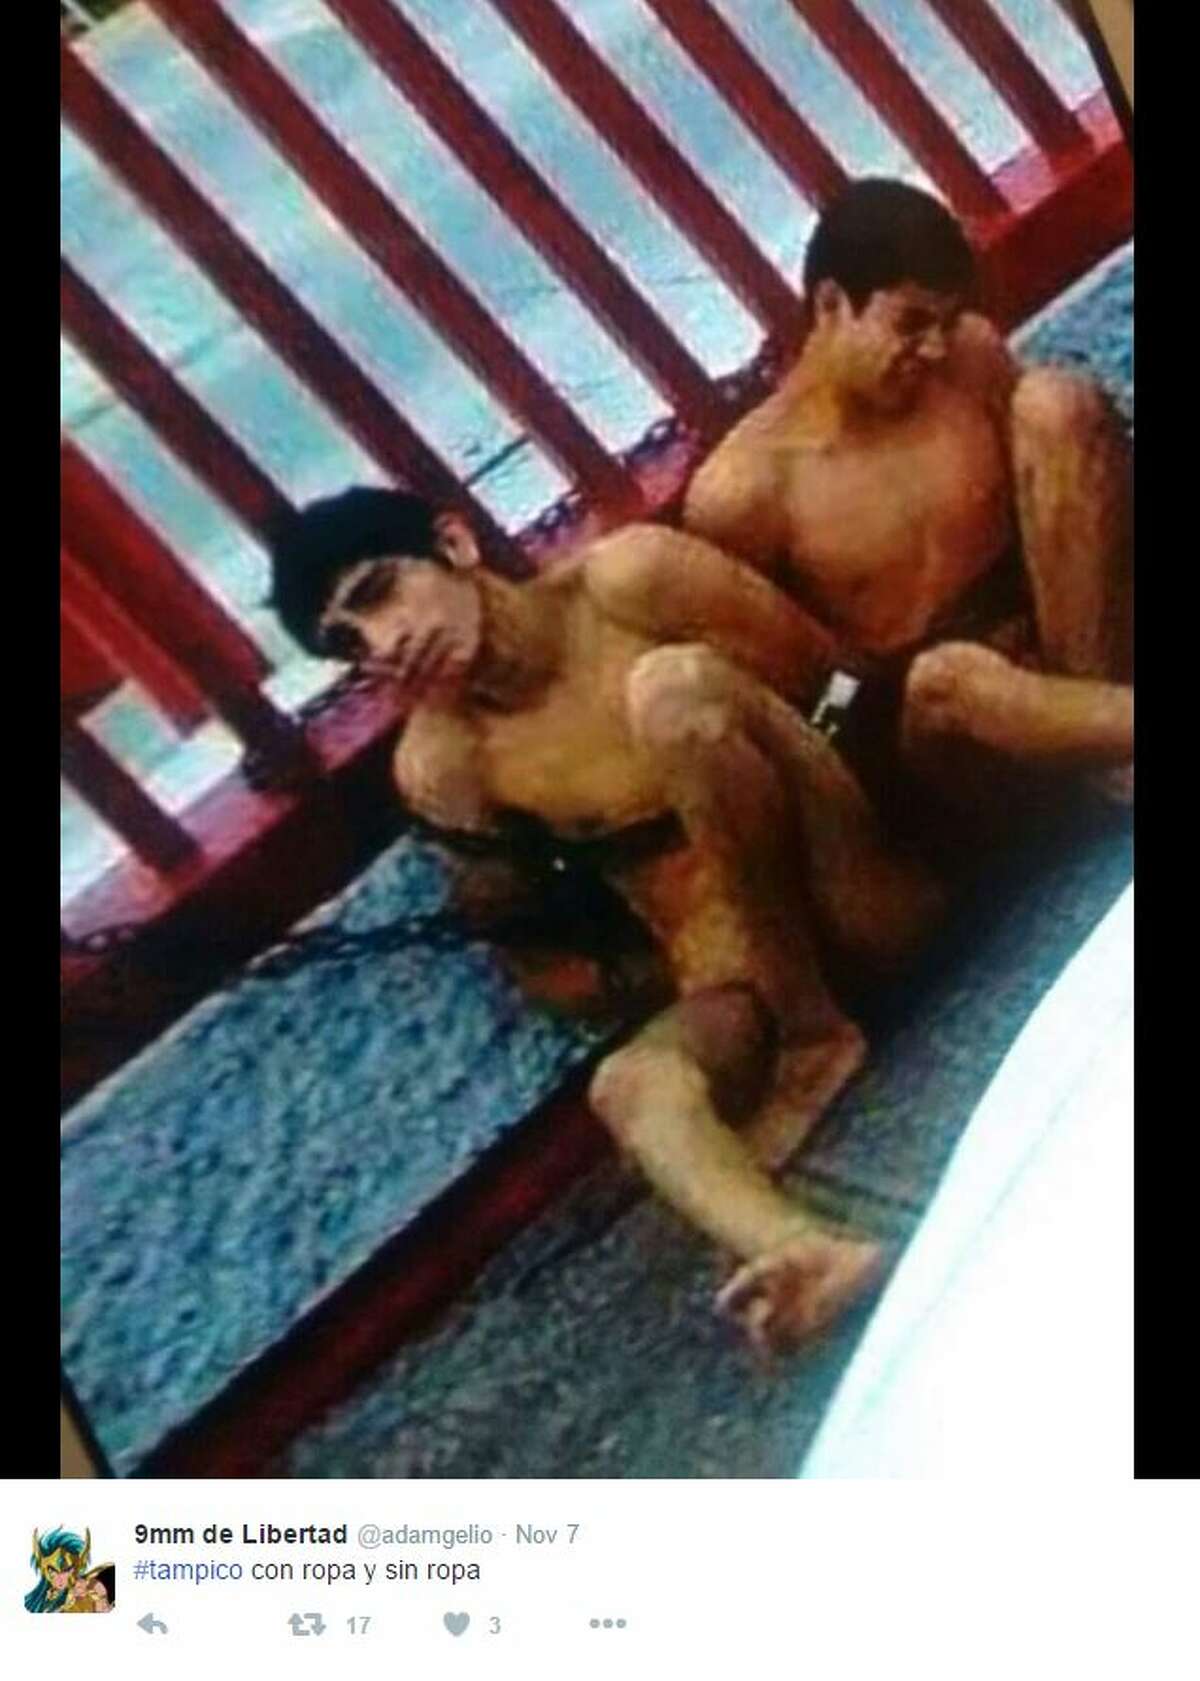 naked mexicans girls wit guns